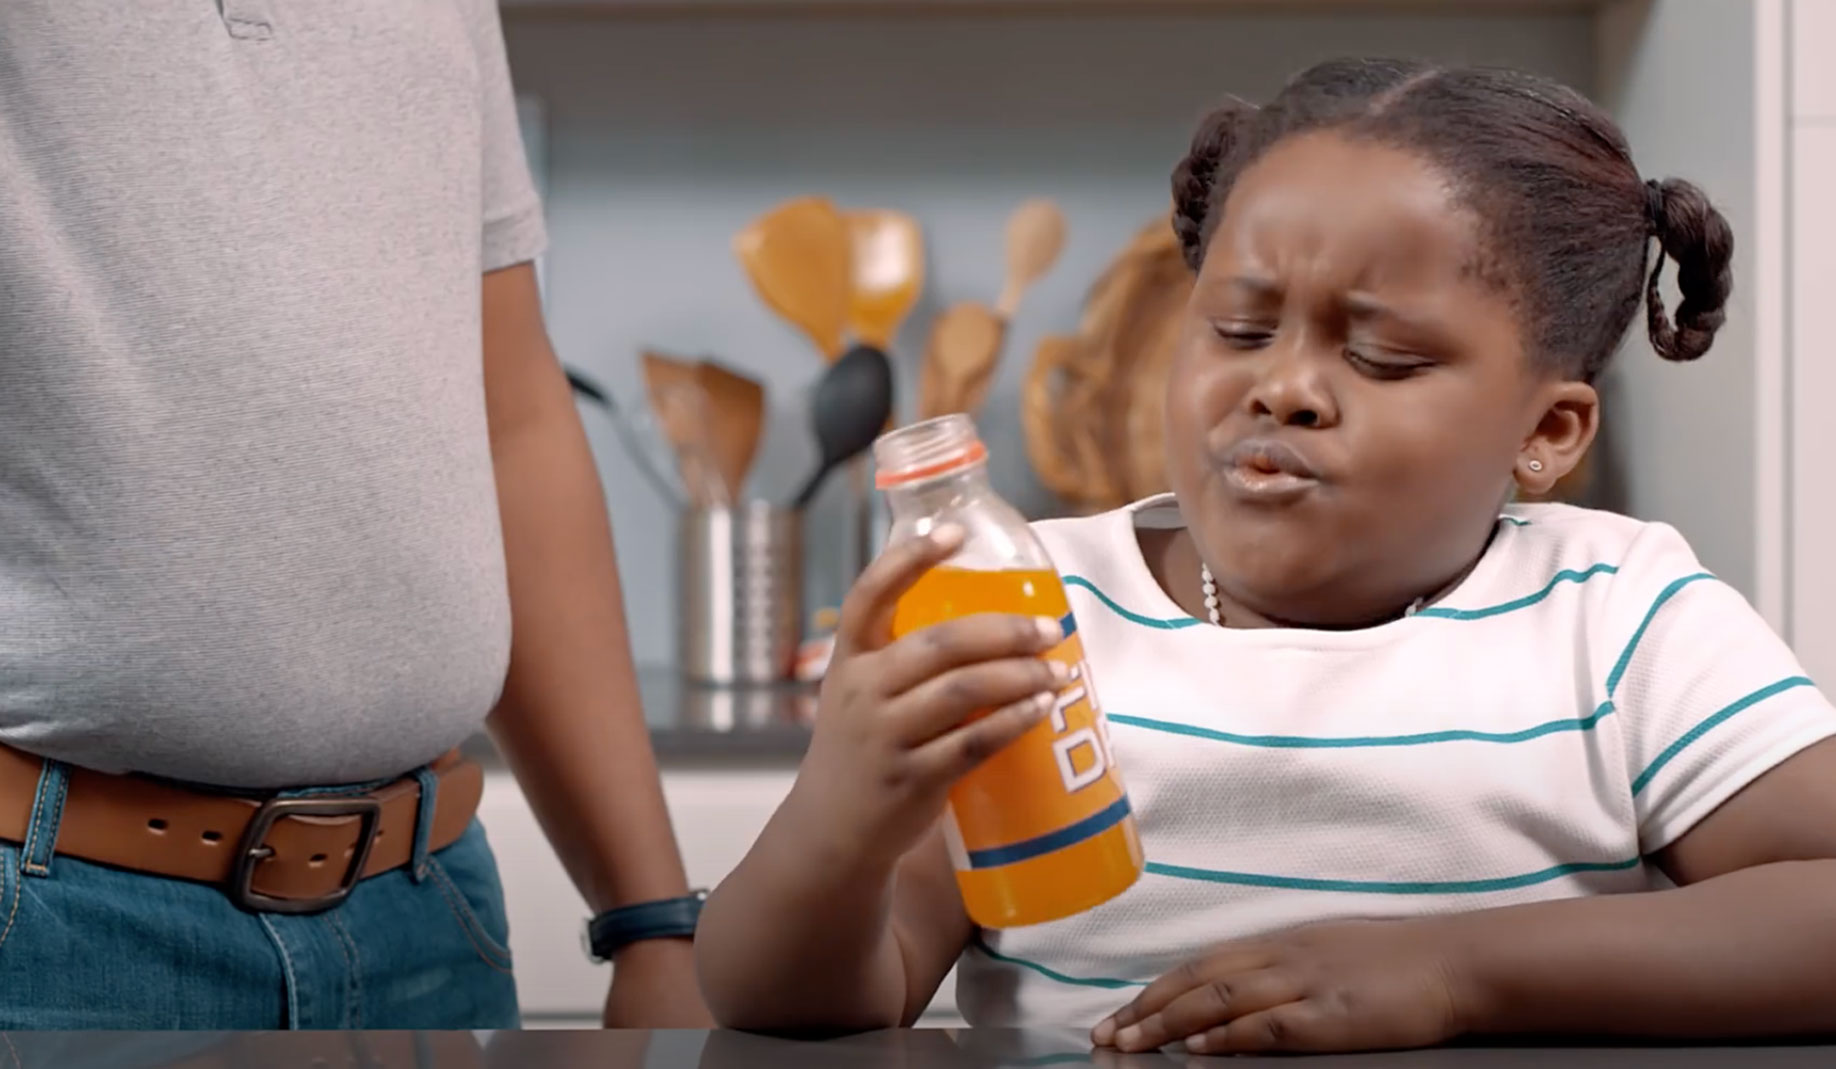 A still from “Are you drinking yourself sick?” agenda-setting TV ad featuring a child and her father, showing how drinking sugary drinks can lead to the onset of diseases Source: HEALA